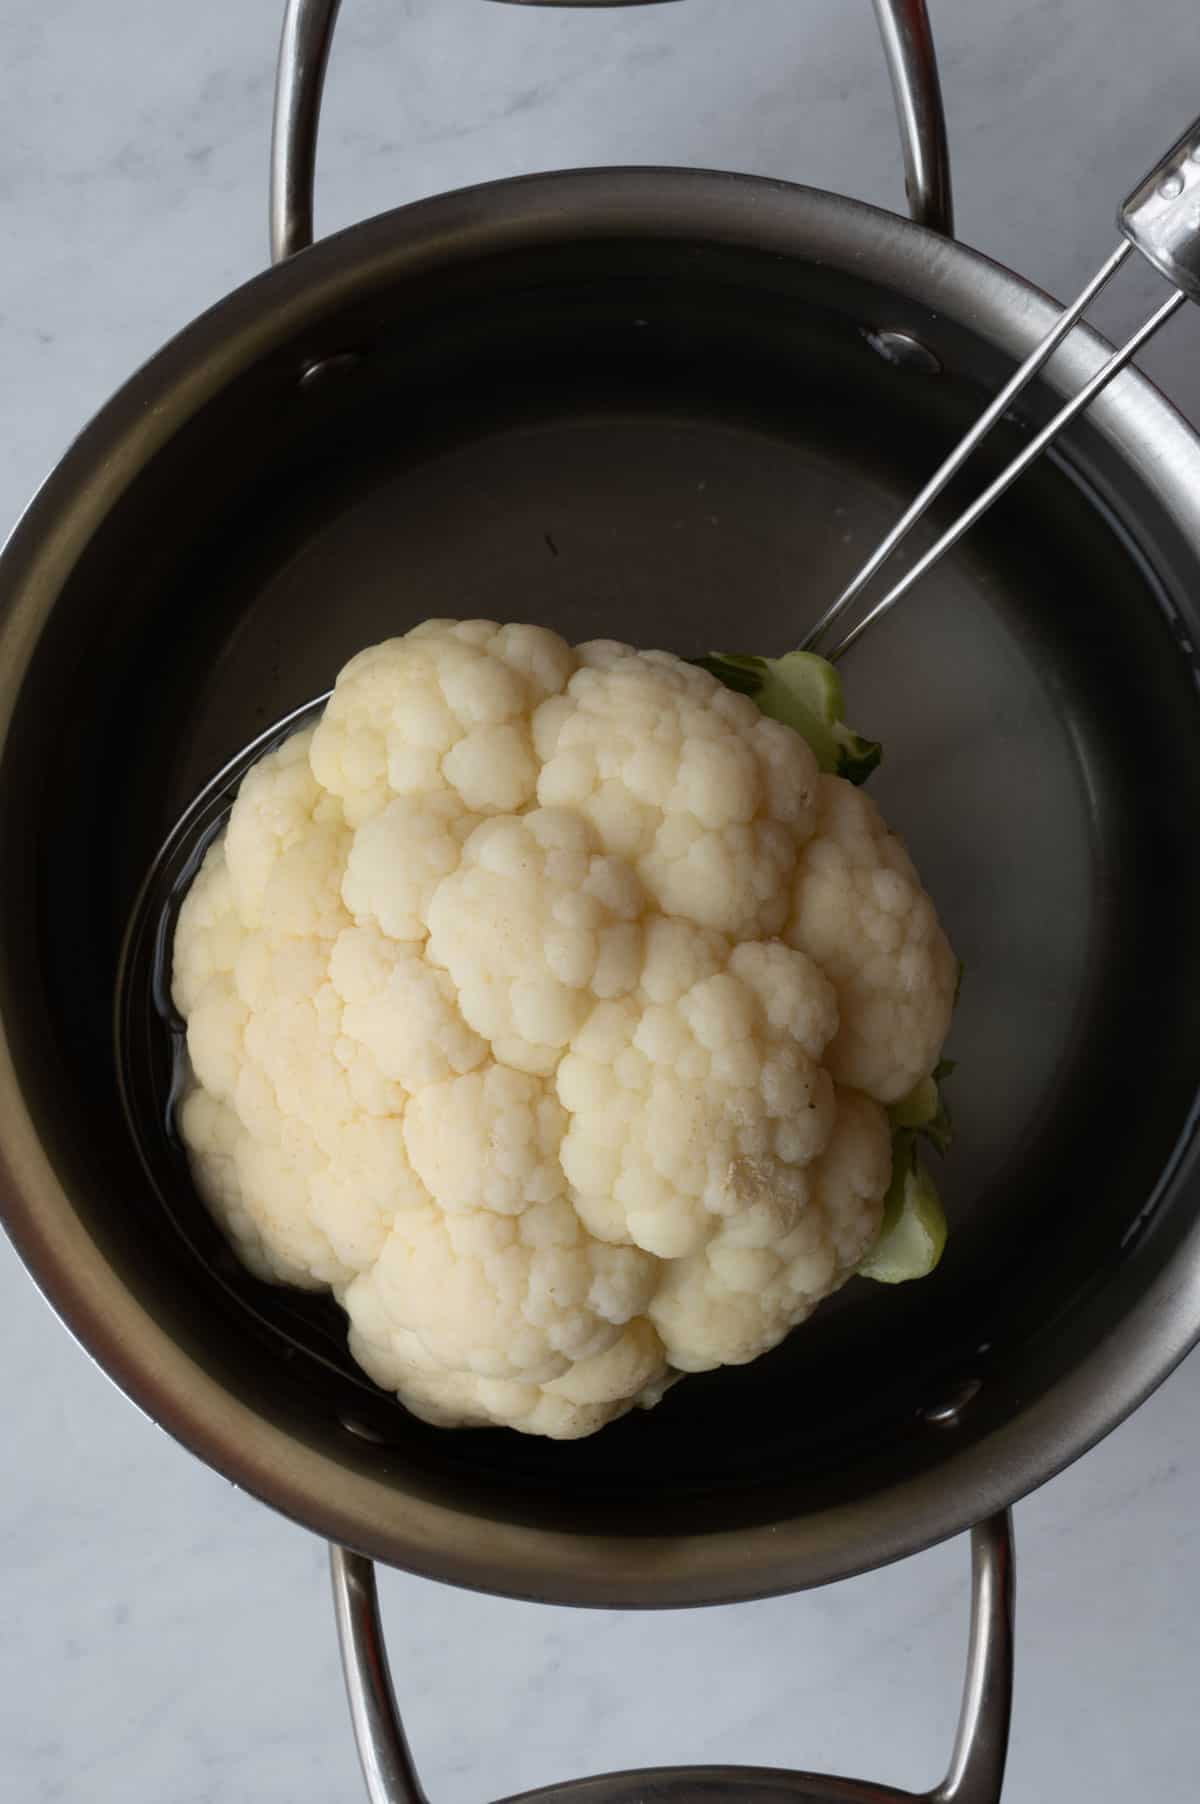 One medium head cauliflower in a spider coming out of a stainless steel saucepan with water.